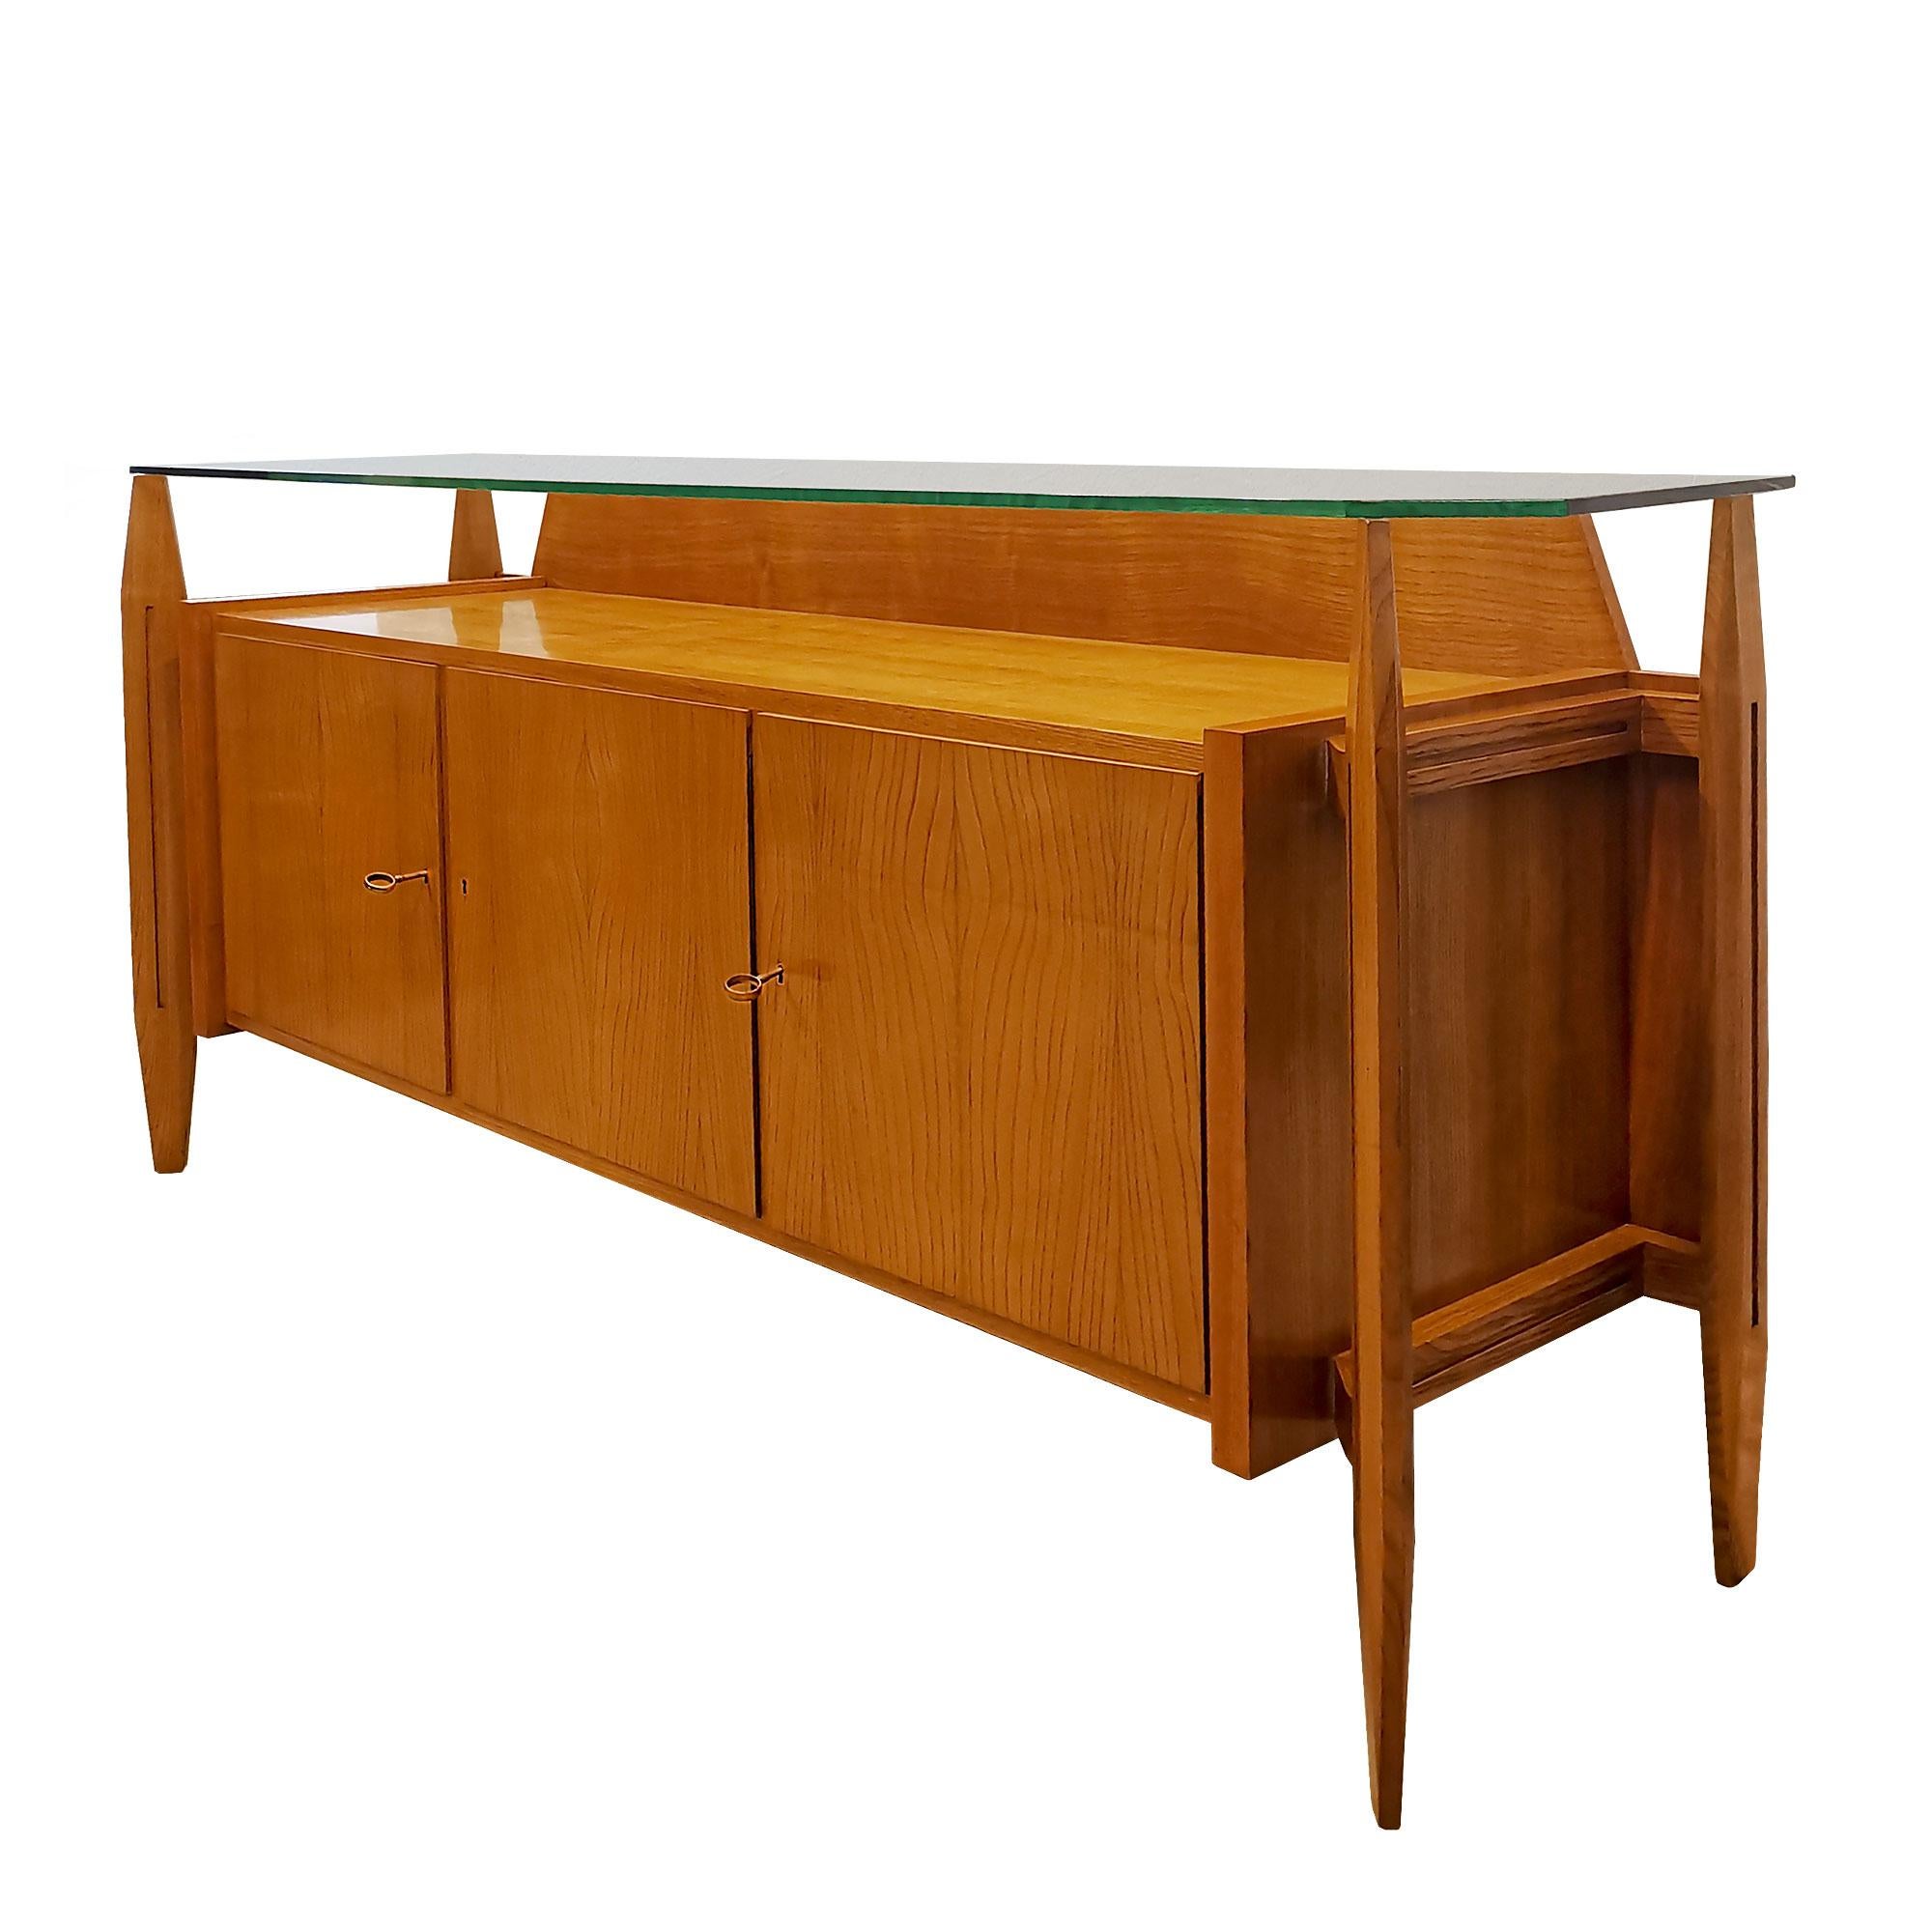 Three-door sideboard with ash wood structure and solid ash stands, peeled ash veneer for body and doors, satiny shellac finishing. Thick original glass on top and polished brass keys.
Italy c. 1950.